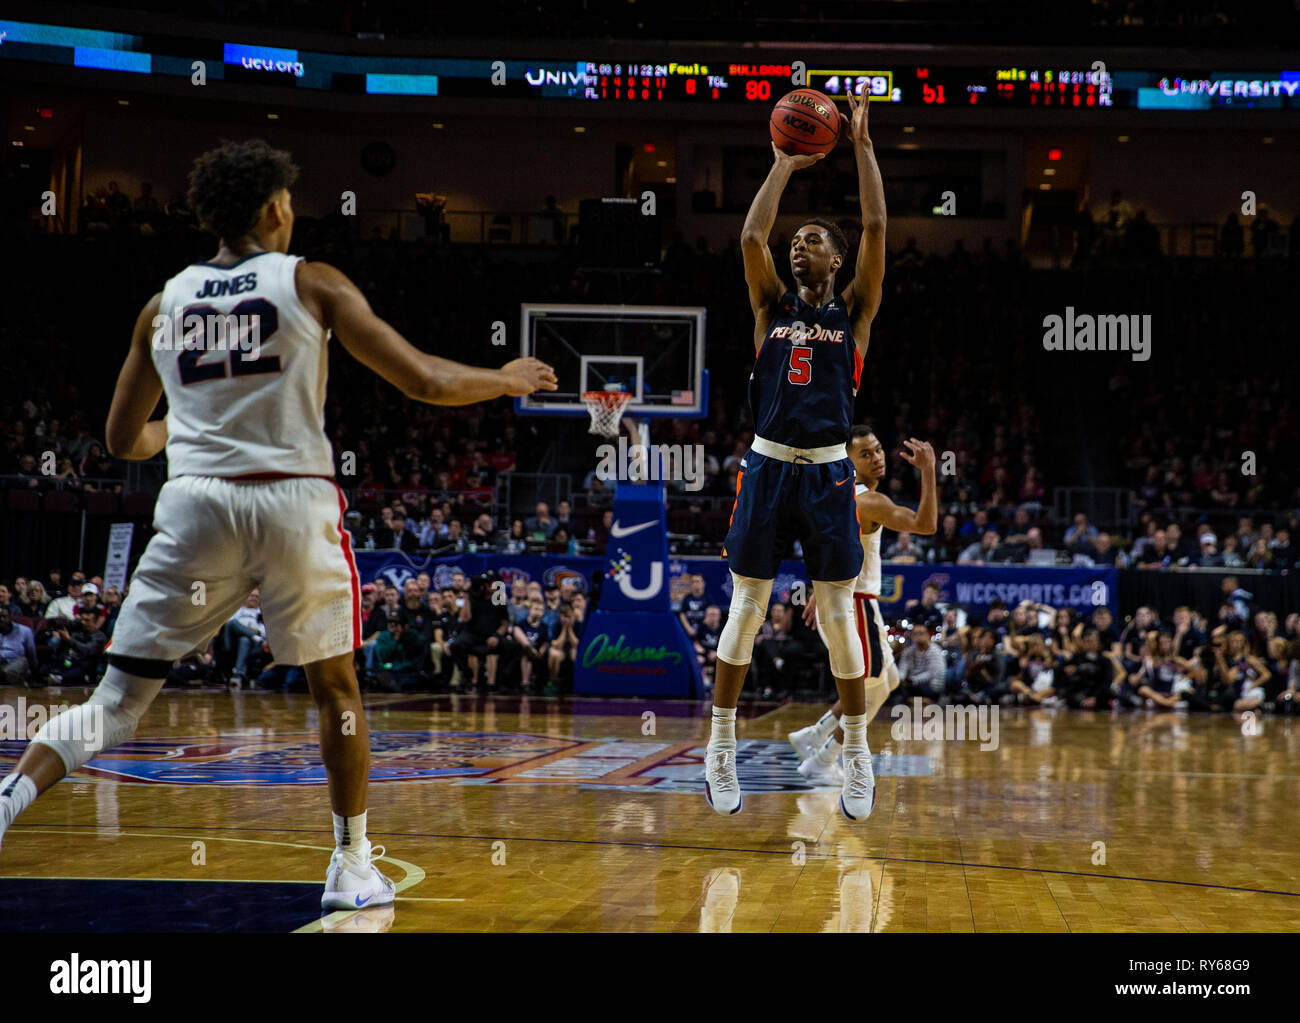 Mar 11 2019 Las Vegas, NV, U.S.A. Pepperdine guard Jade' Smith (5) takes a shot during the NCAA West Coast Conference Men's Basketball Tournament semi -final between the Pepperdine Wave and the Gonzaga Bulldogs 74-100 lost at Orleans Arena Las Vegas, NV. Thurman James/CSM Stock Photo